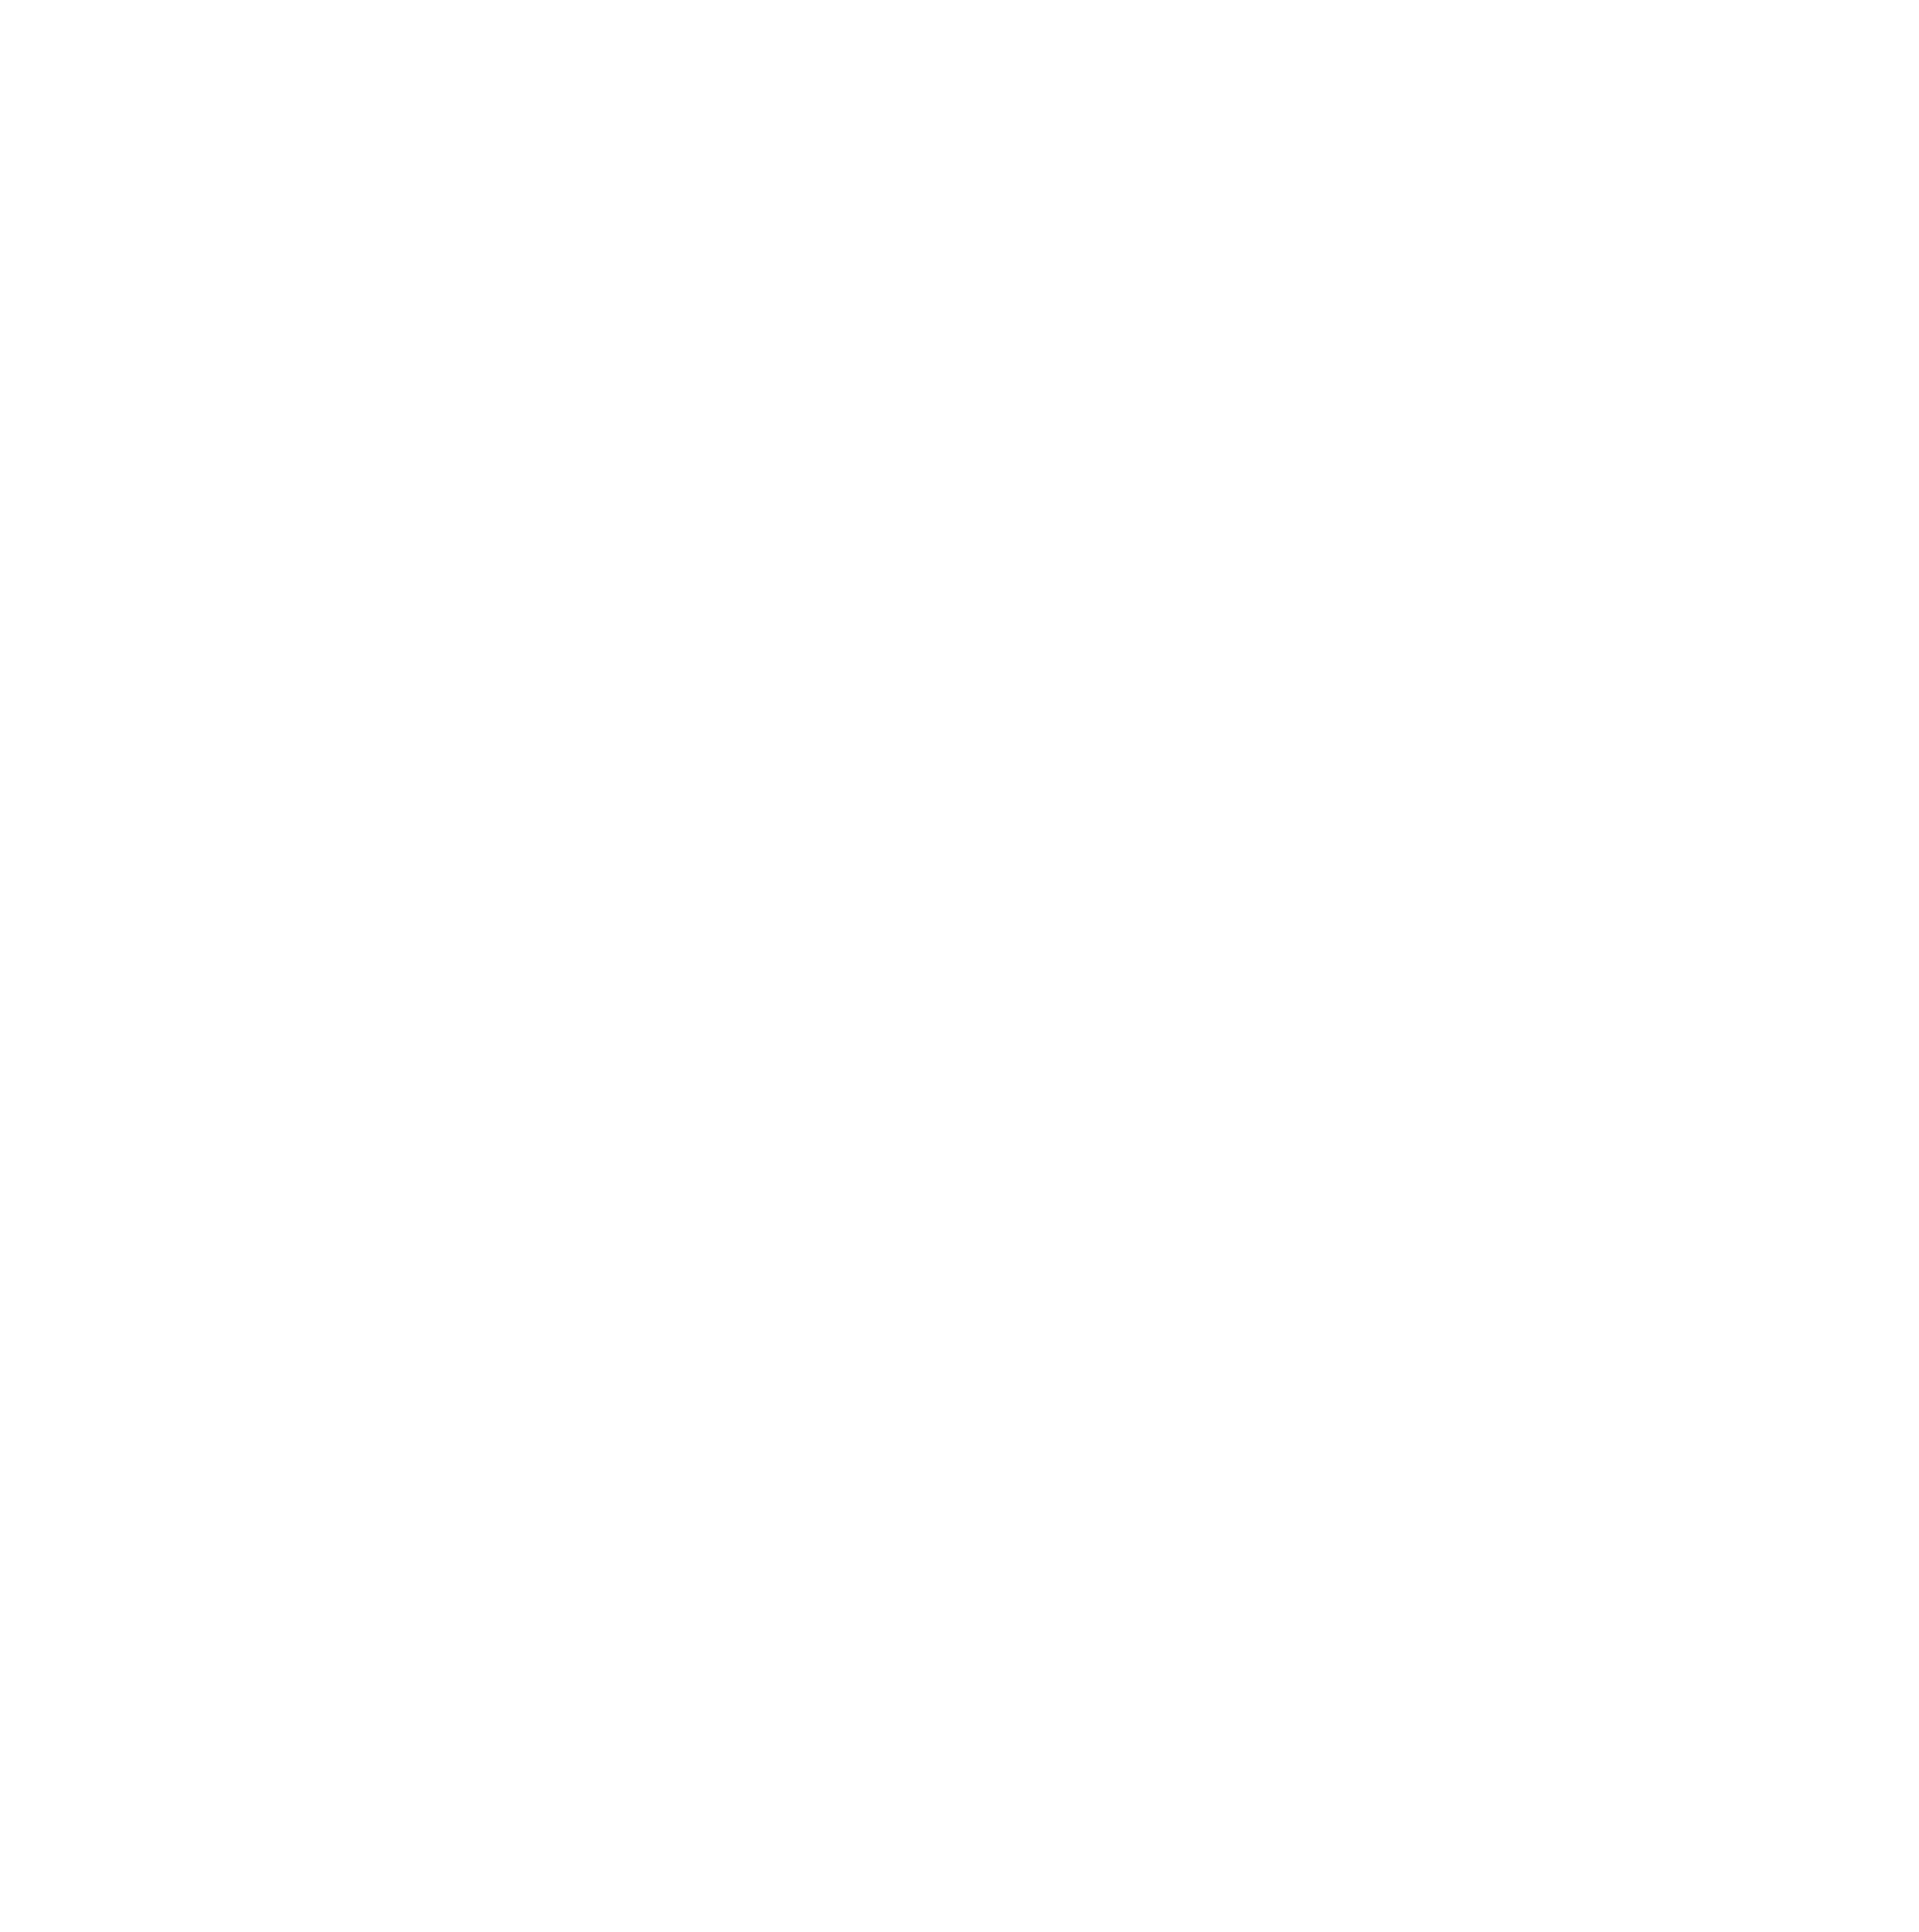 Interac Logo - Download Interac-logo - Interac Logo Black And White PNG Image with ...